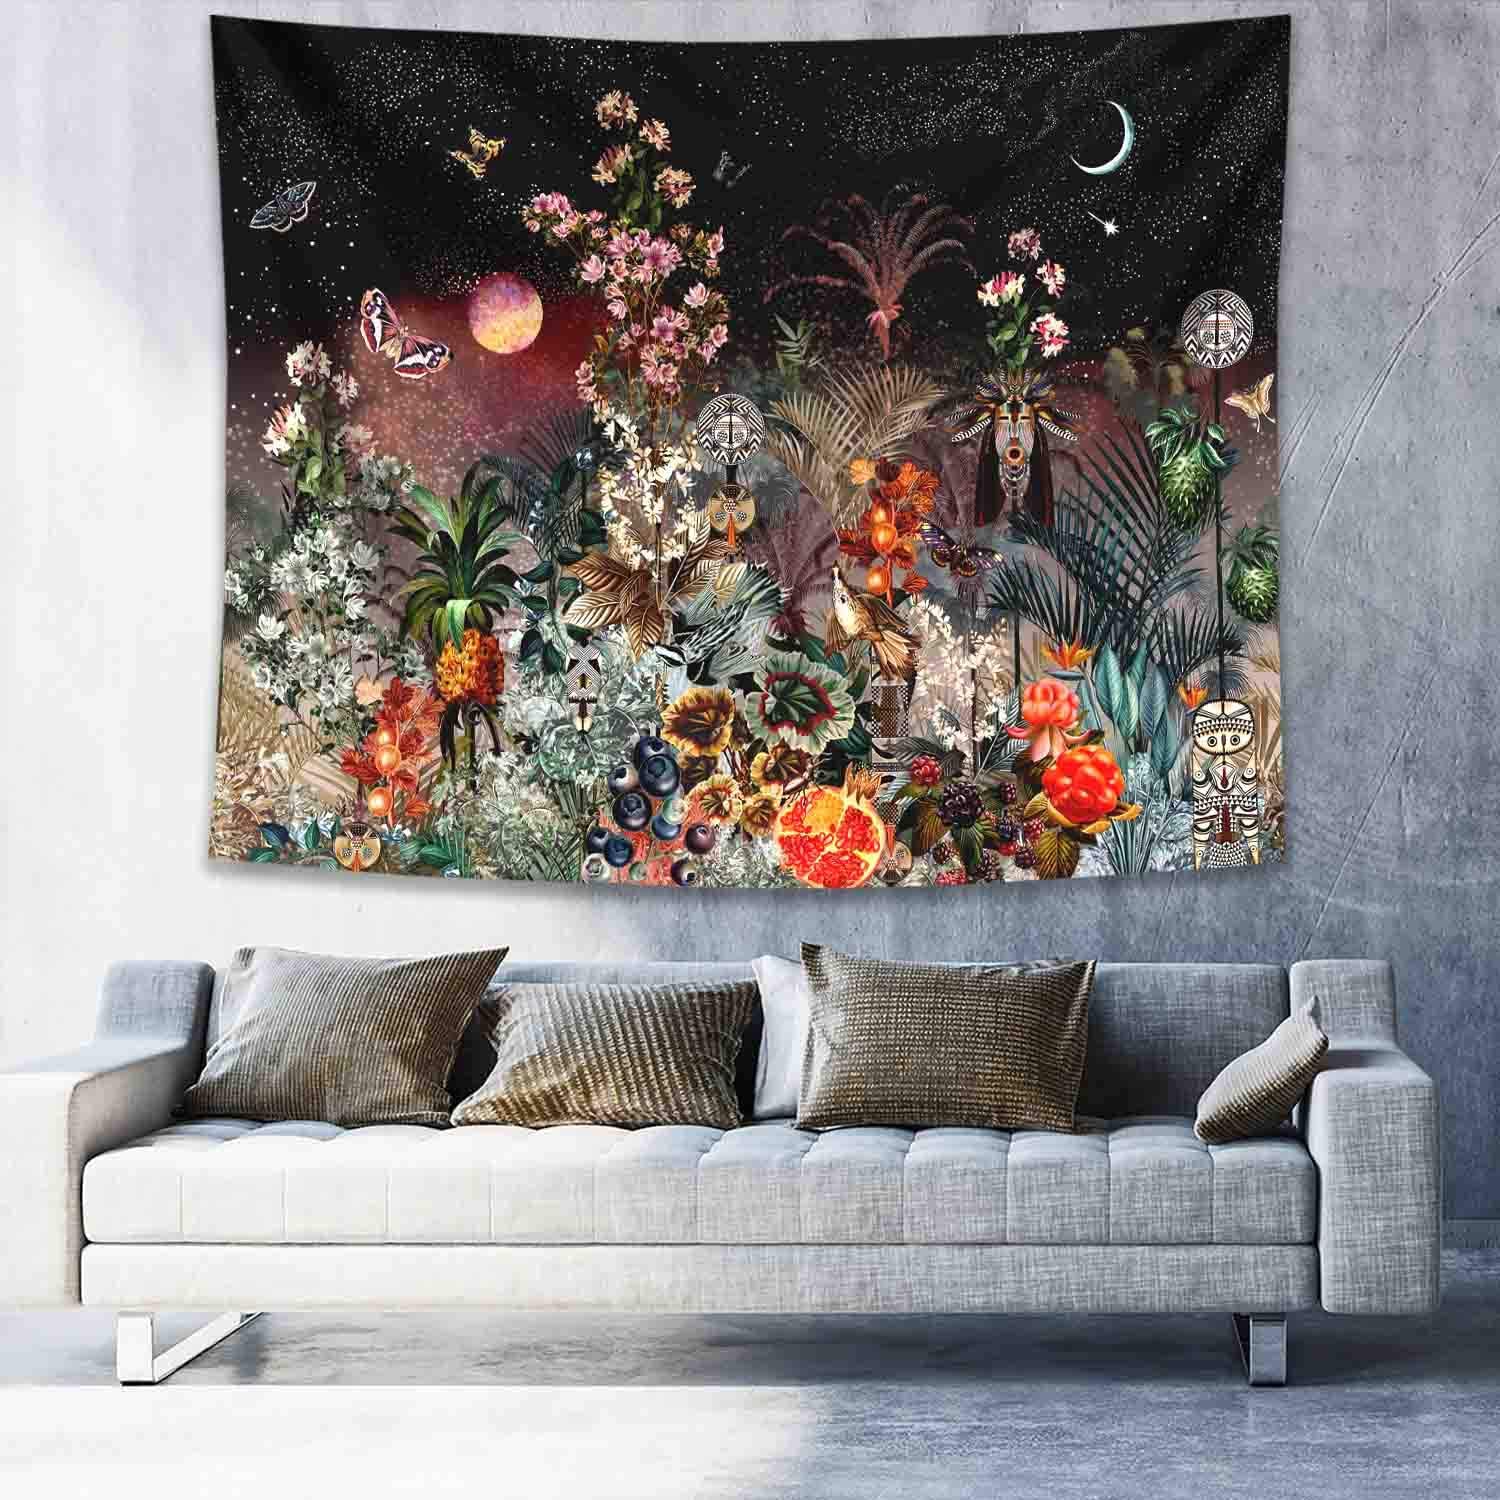 Planets and Nature Wall Hanging Tapestry Art - Floral Fawna